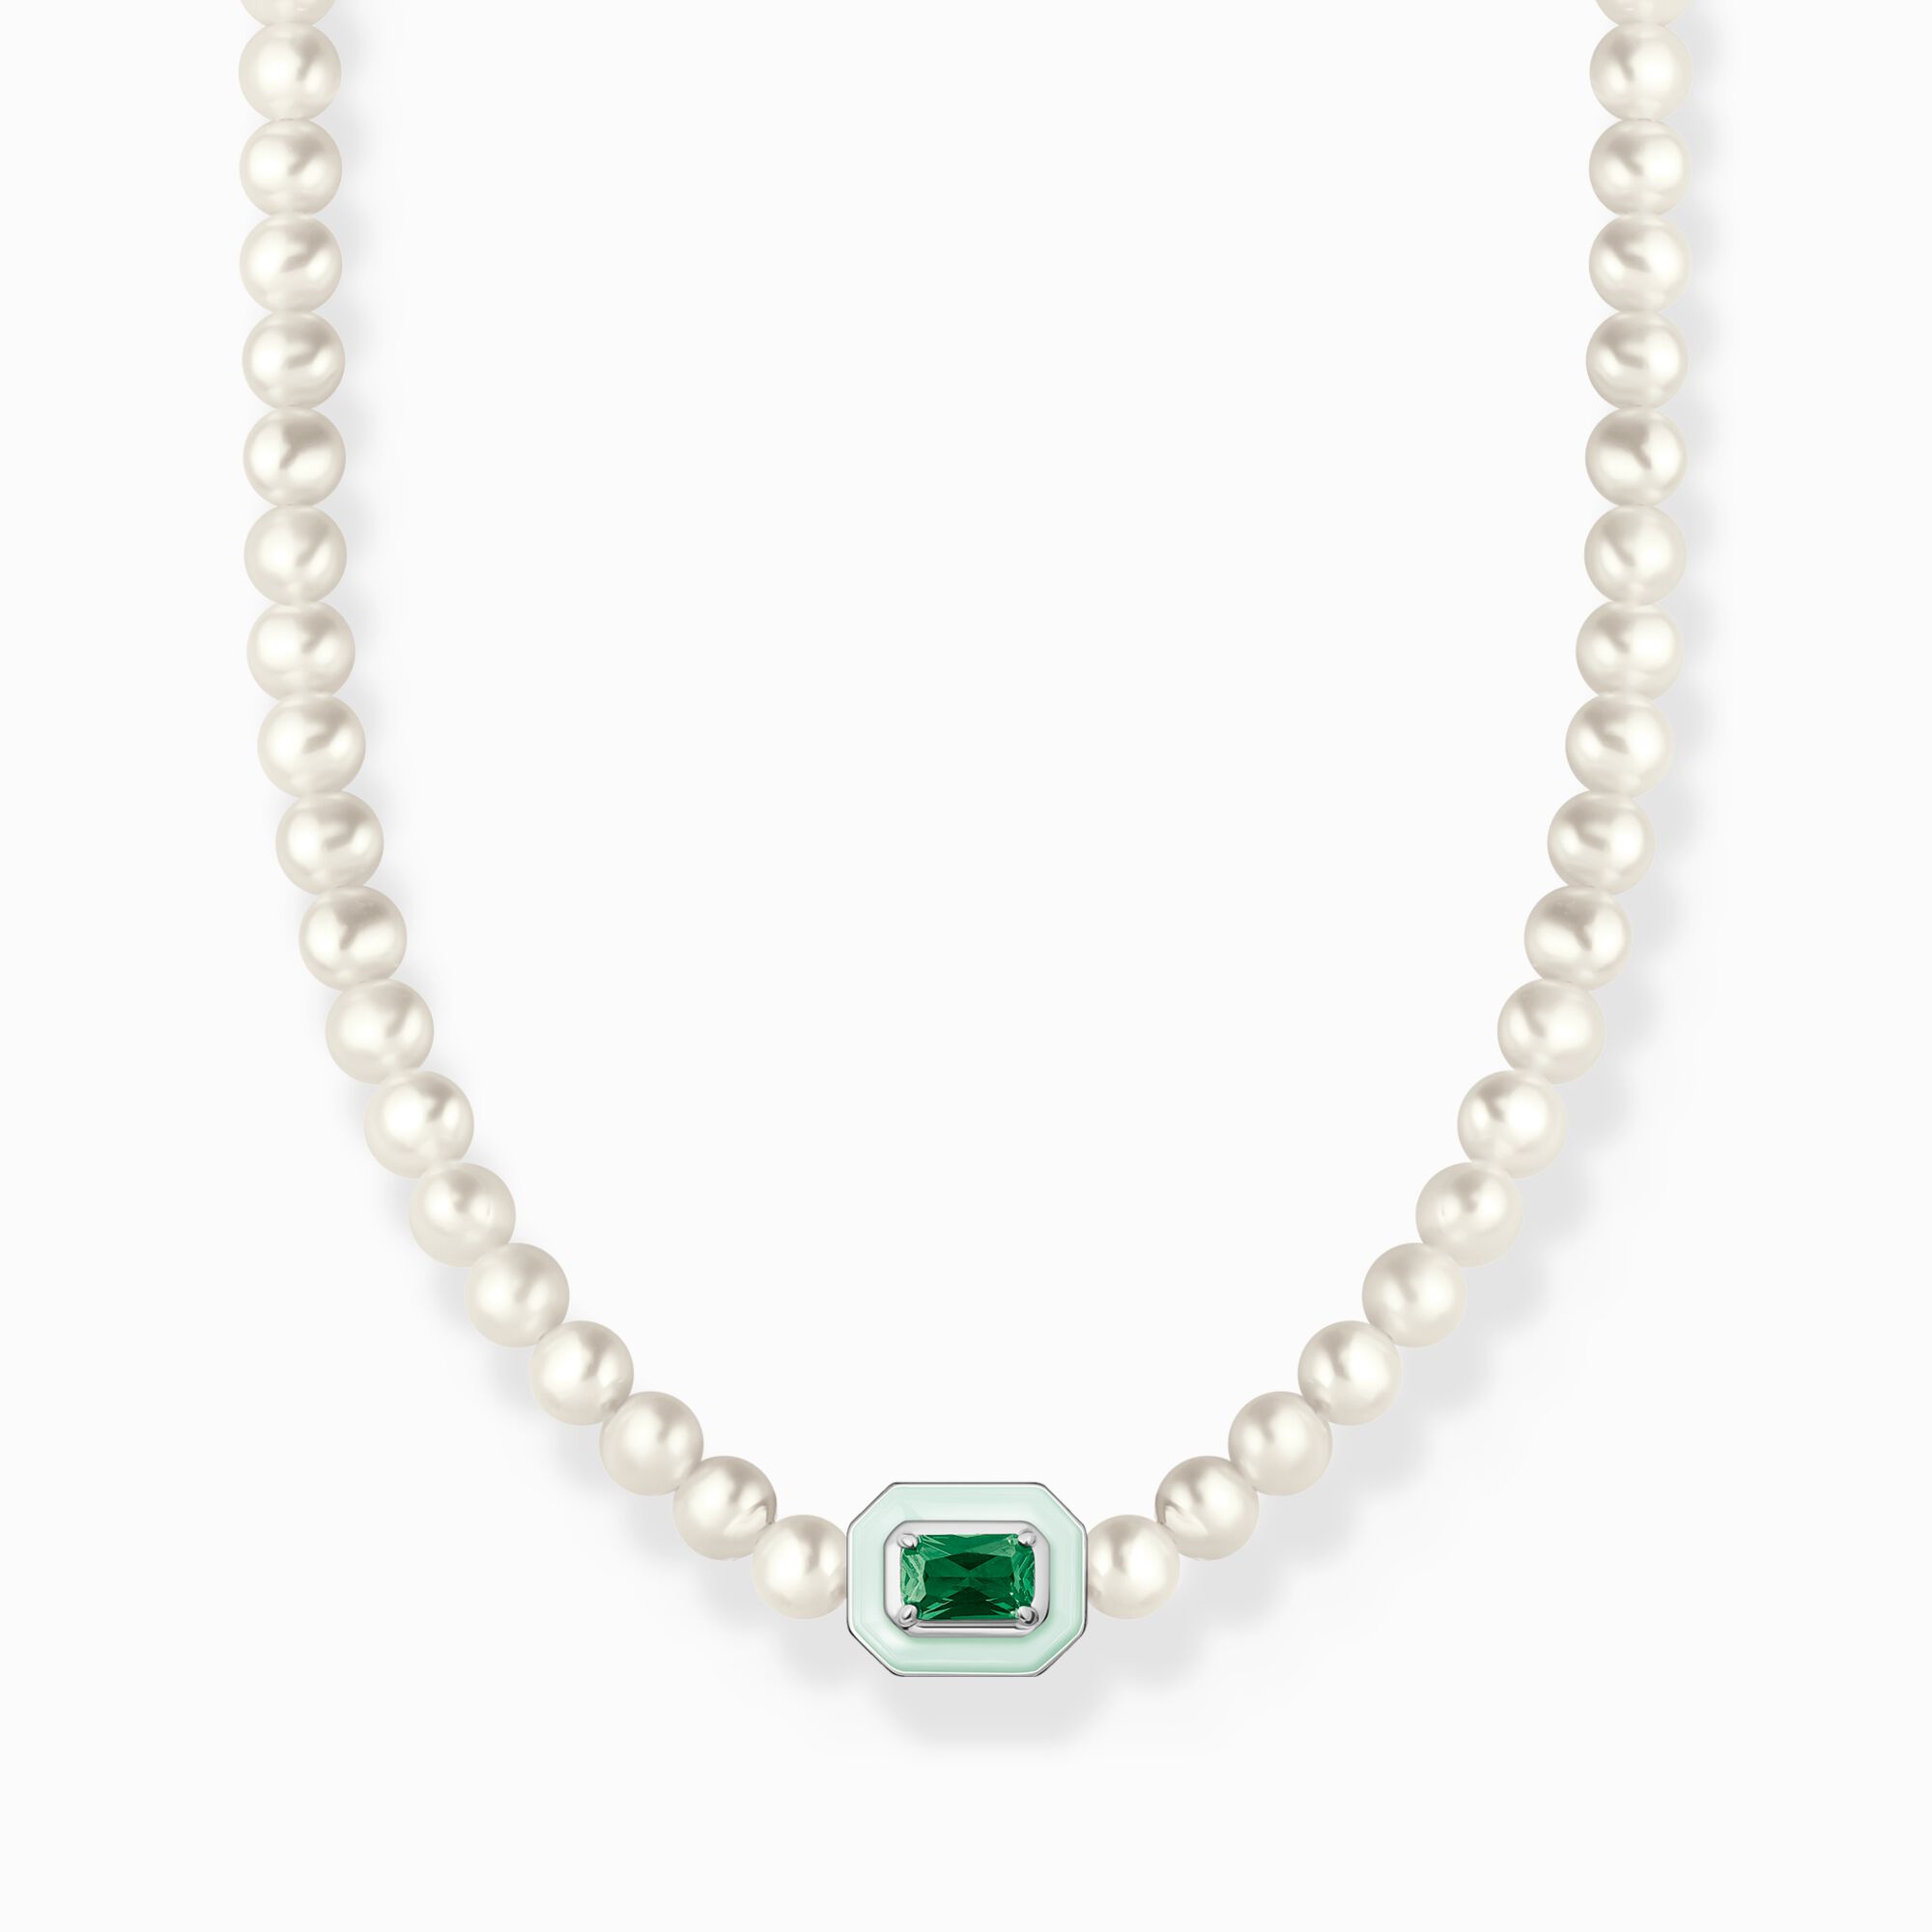 Choker with white pearls and green stone from the Charming Collection collection in the THOMAS SABO online store